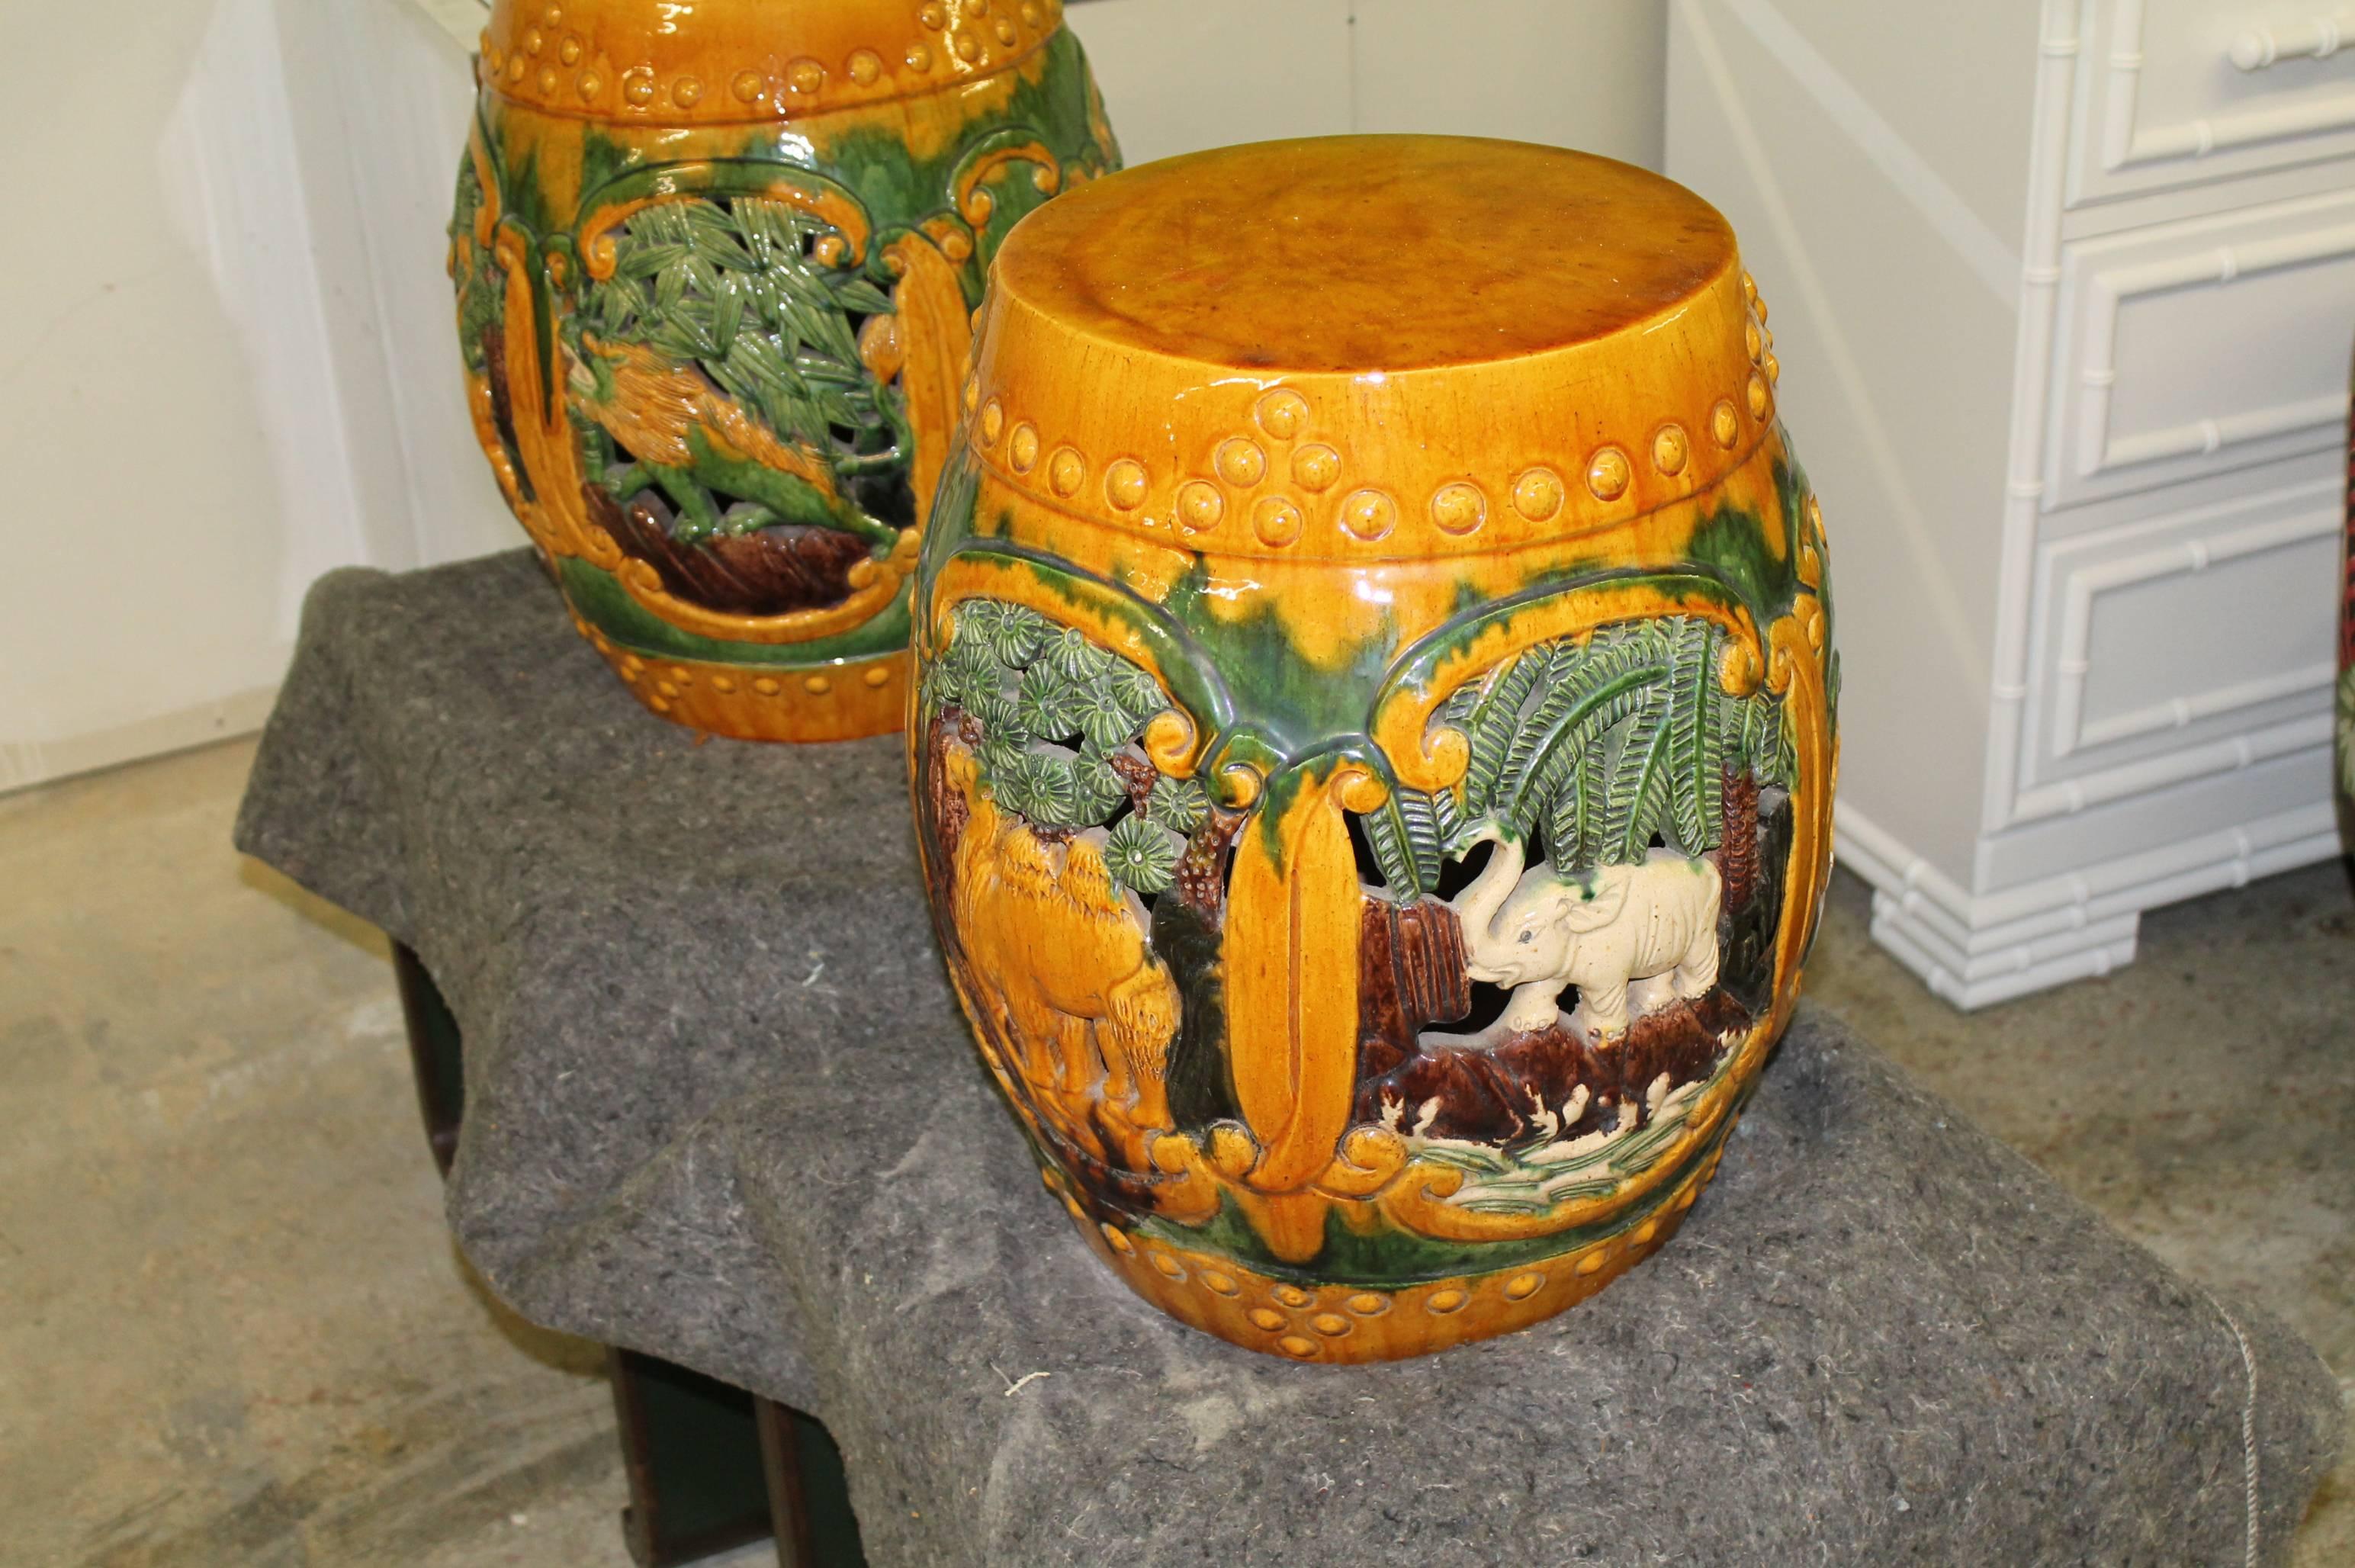  Vintage Pair of Ceramic Garden Drum Stools or Stands with Camels and Elephants 2